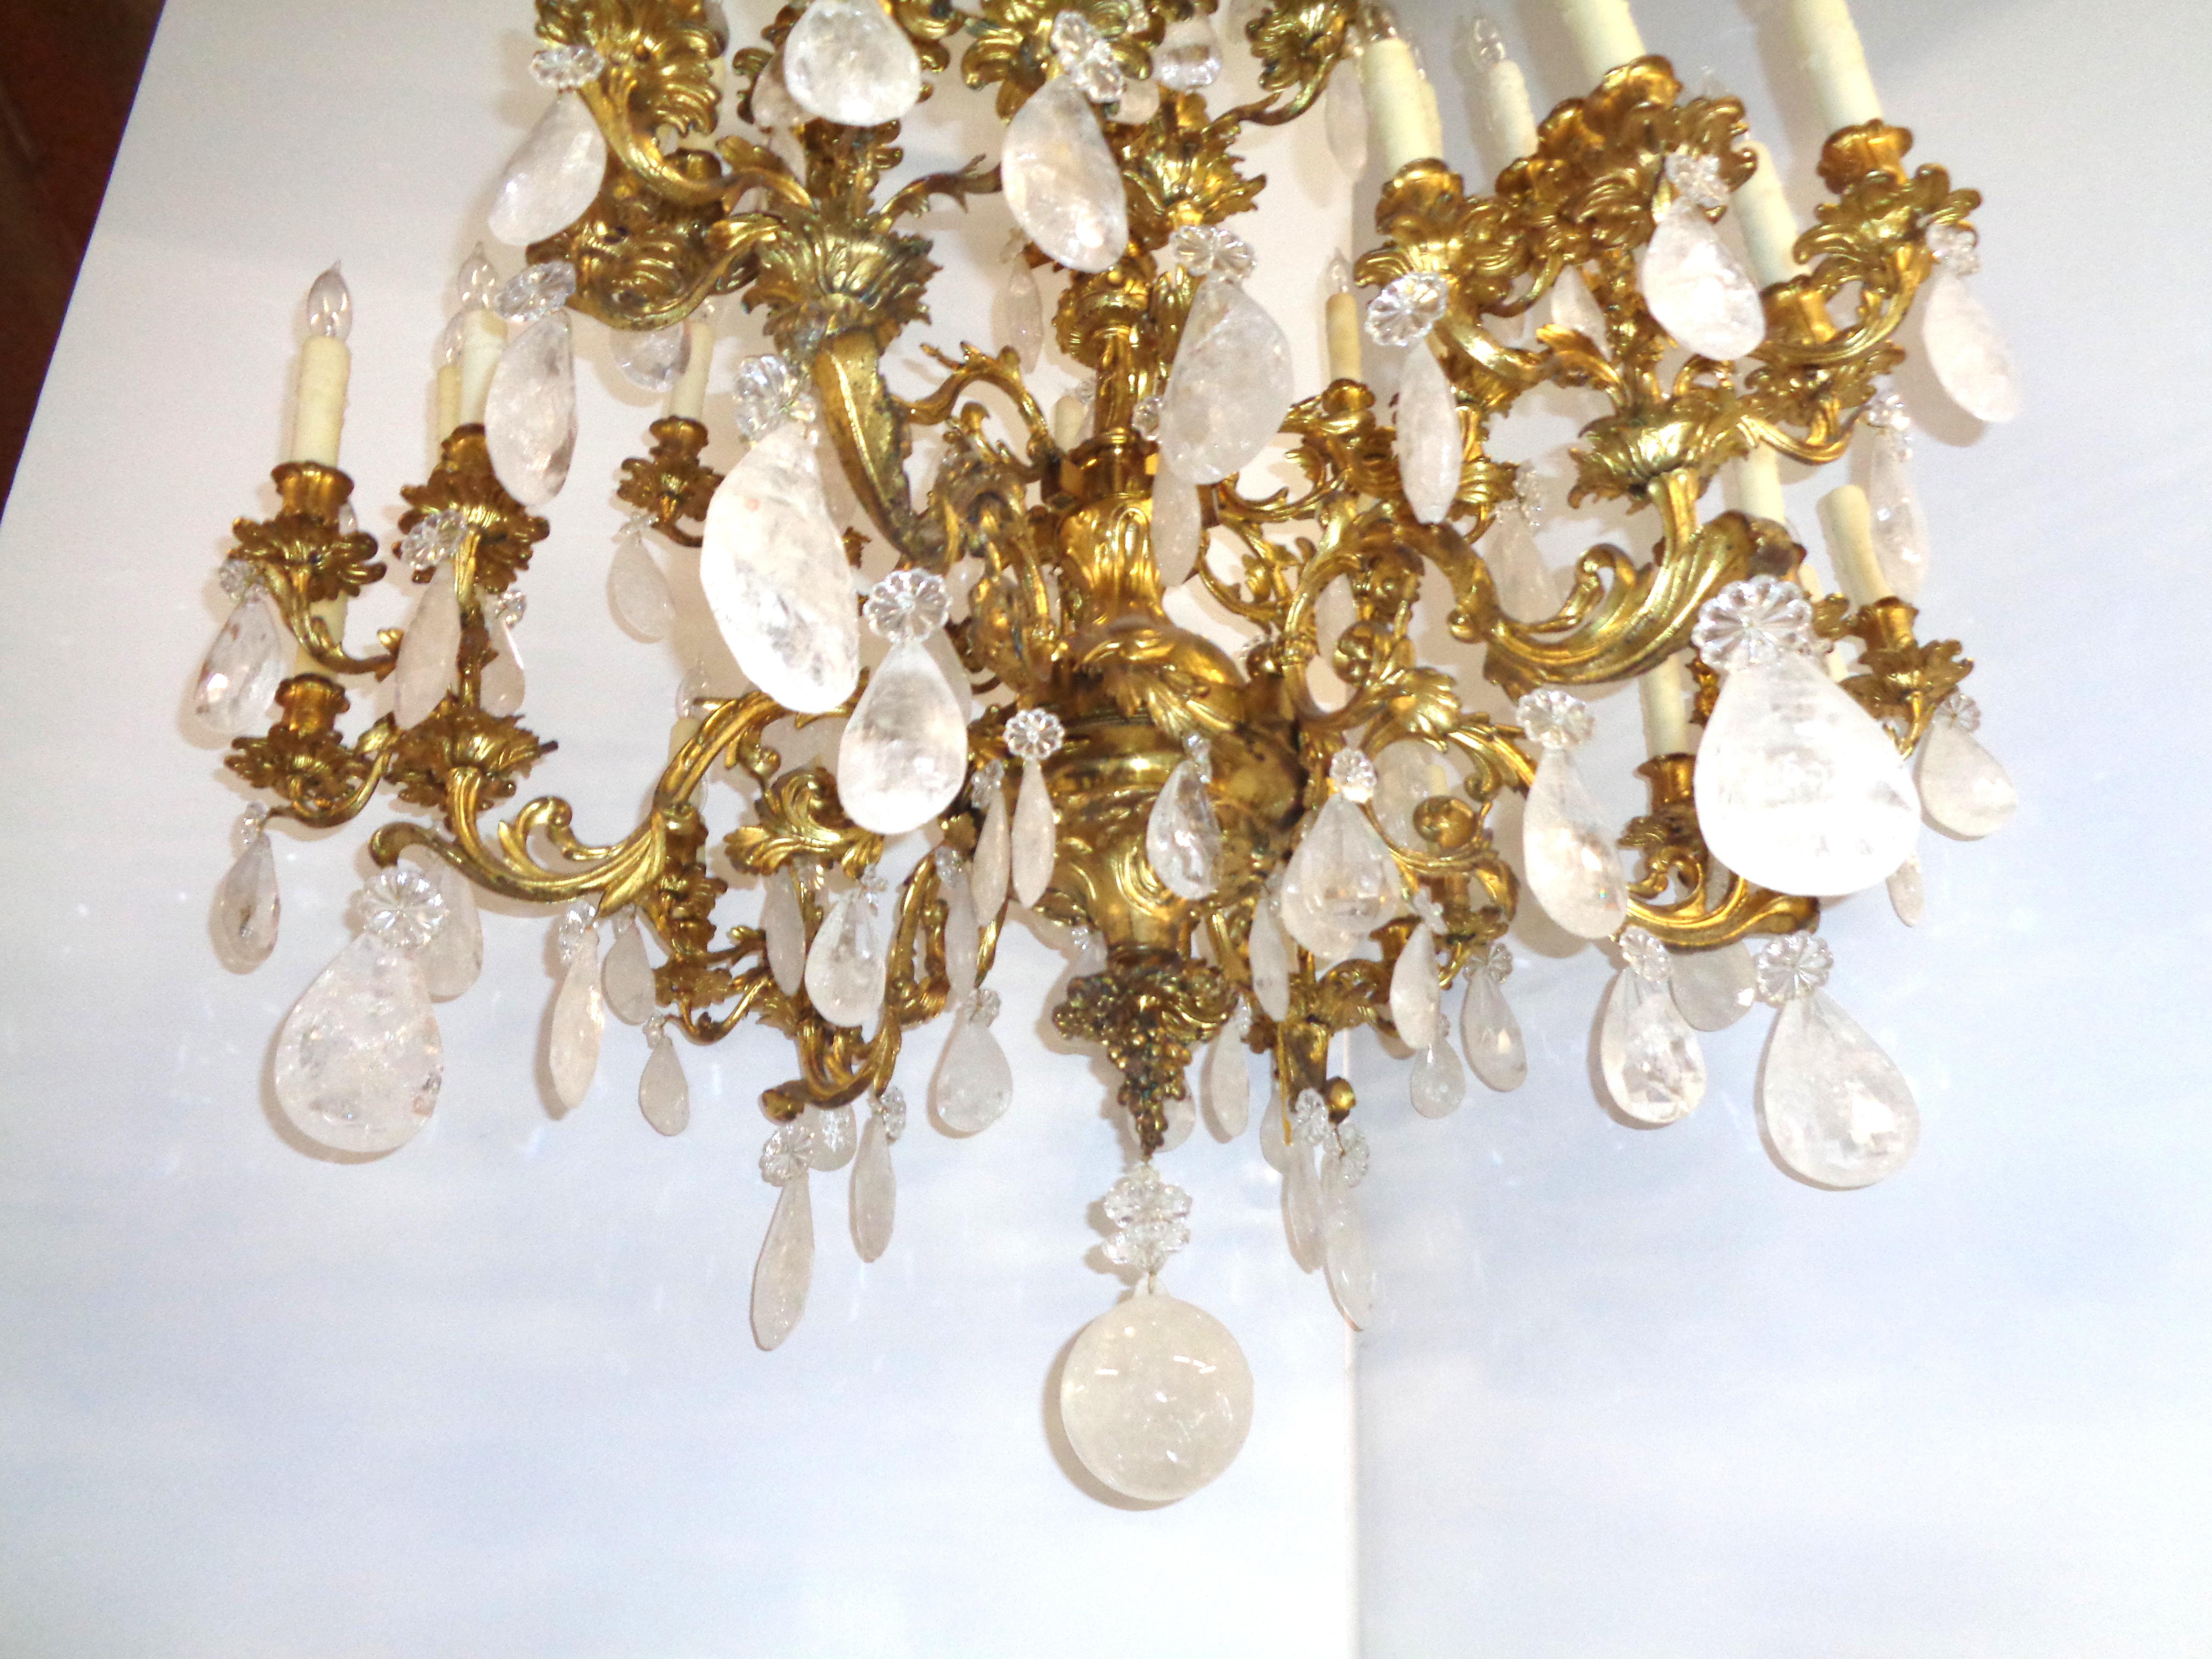 Late 19th Century French Bronze Dore Louis XV Style Baccarat and Rock Crystal Chandelier For Sale